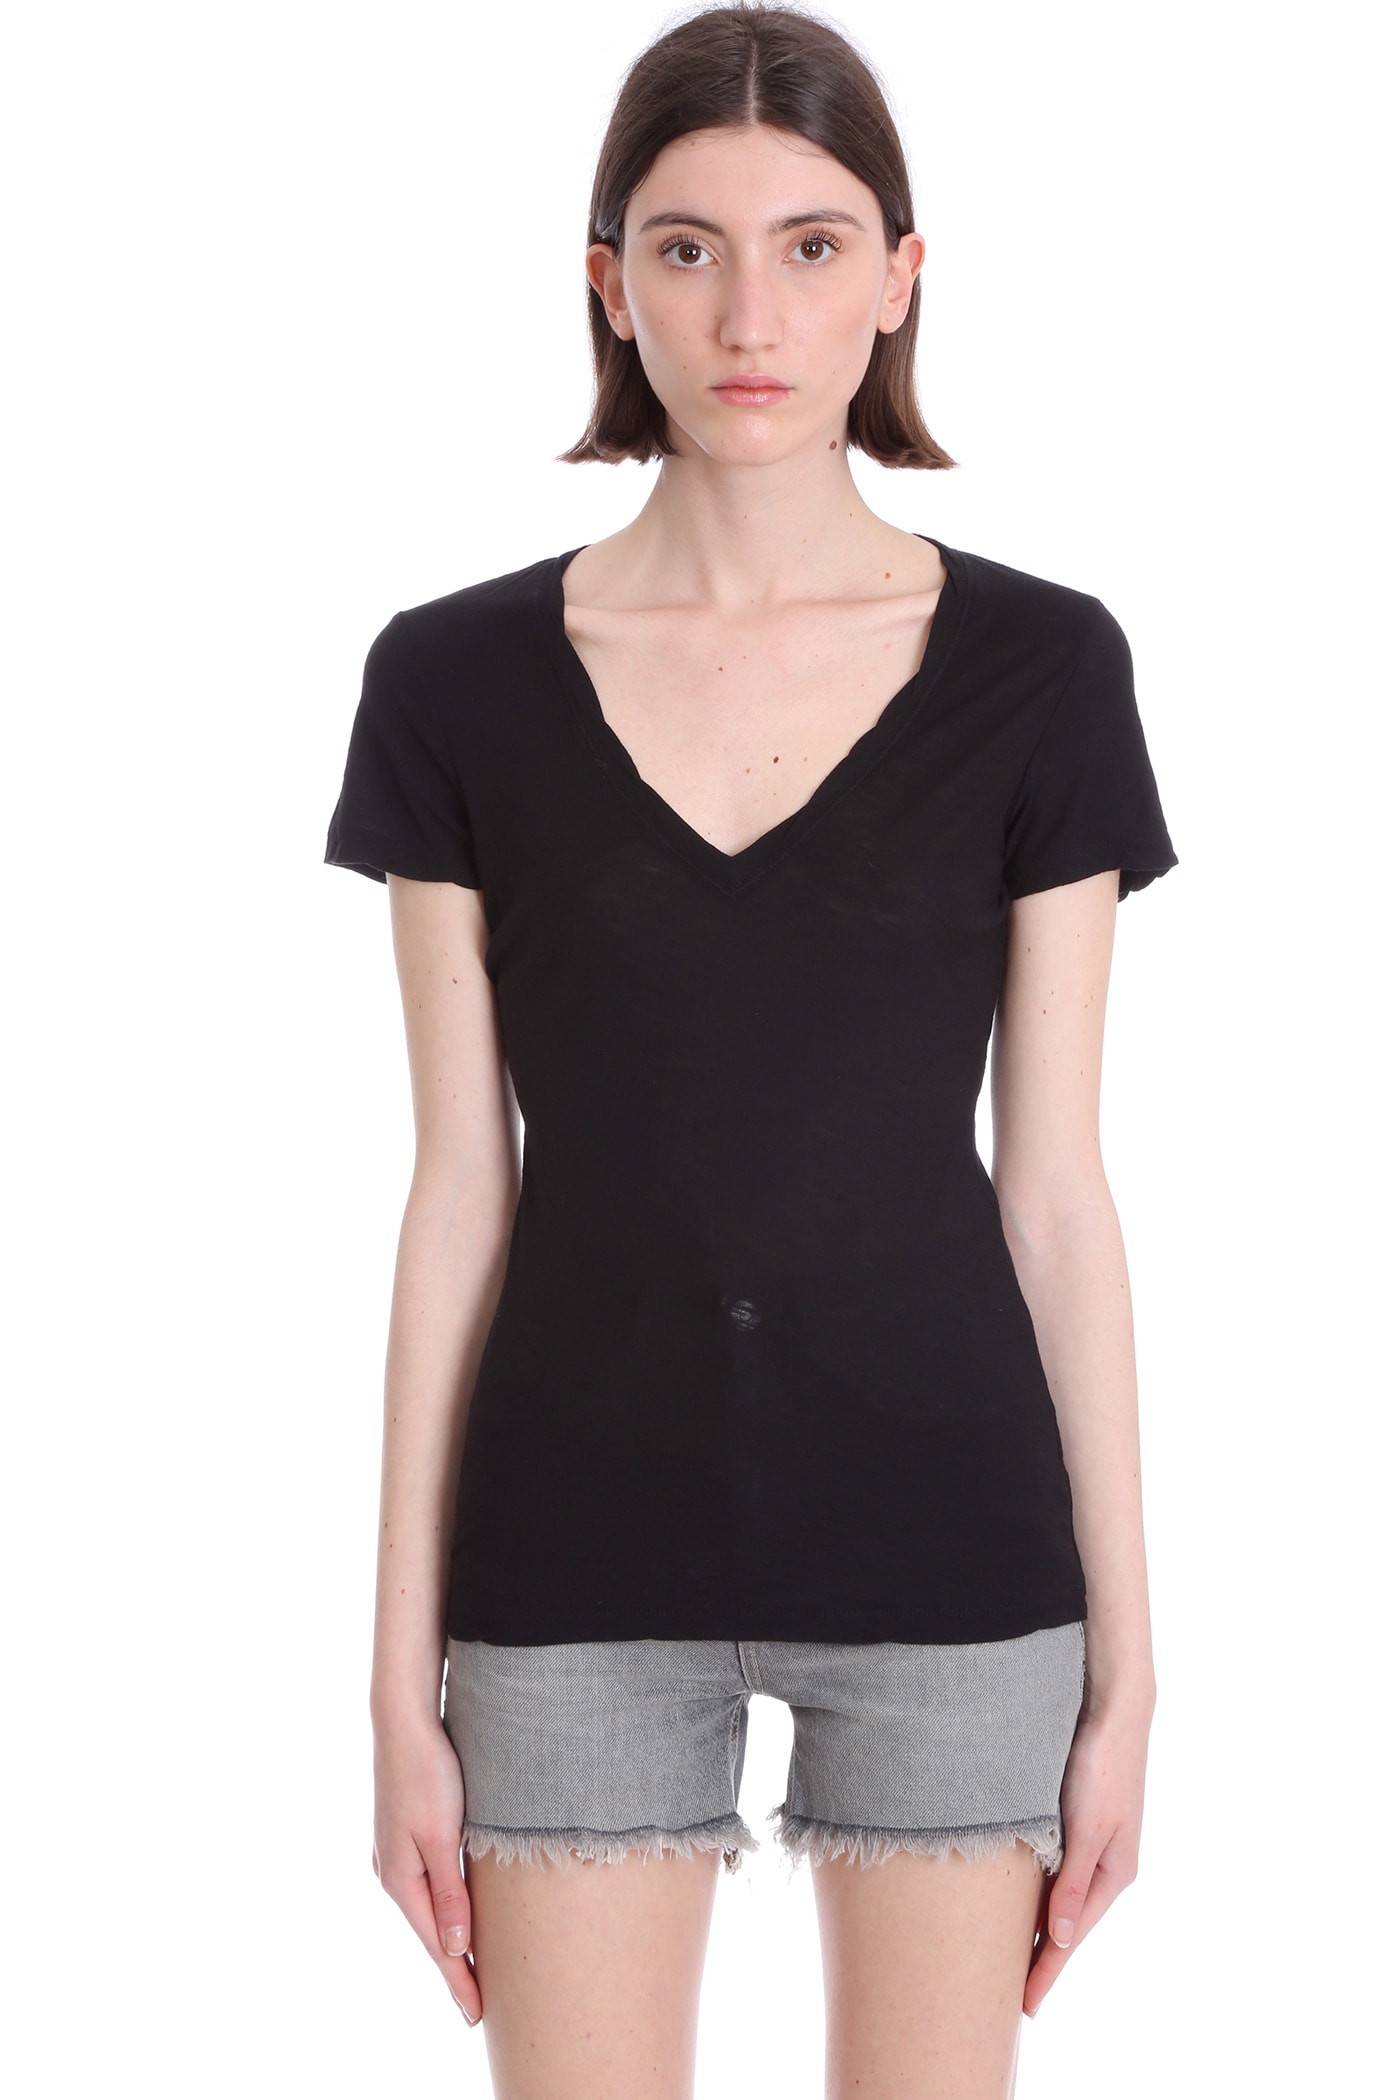 JAMES PERSE T-SHIRT IN BLACK COTTON,WUA3695